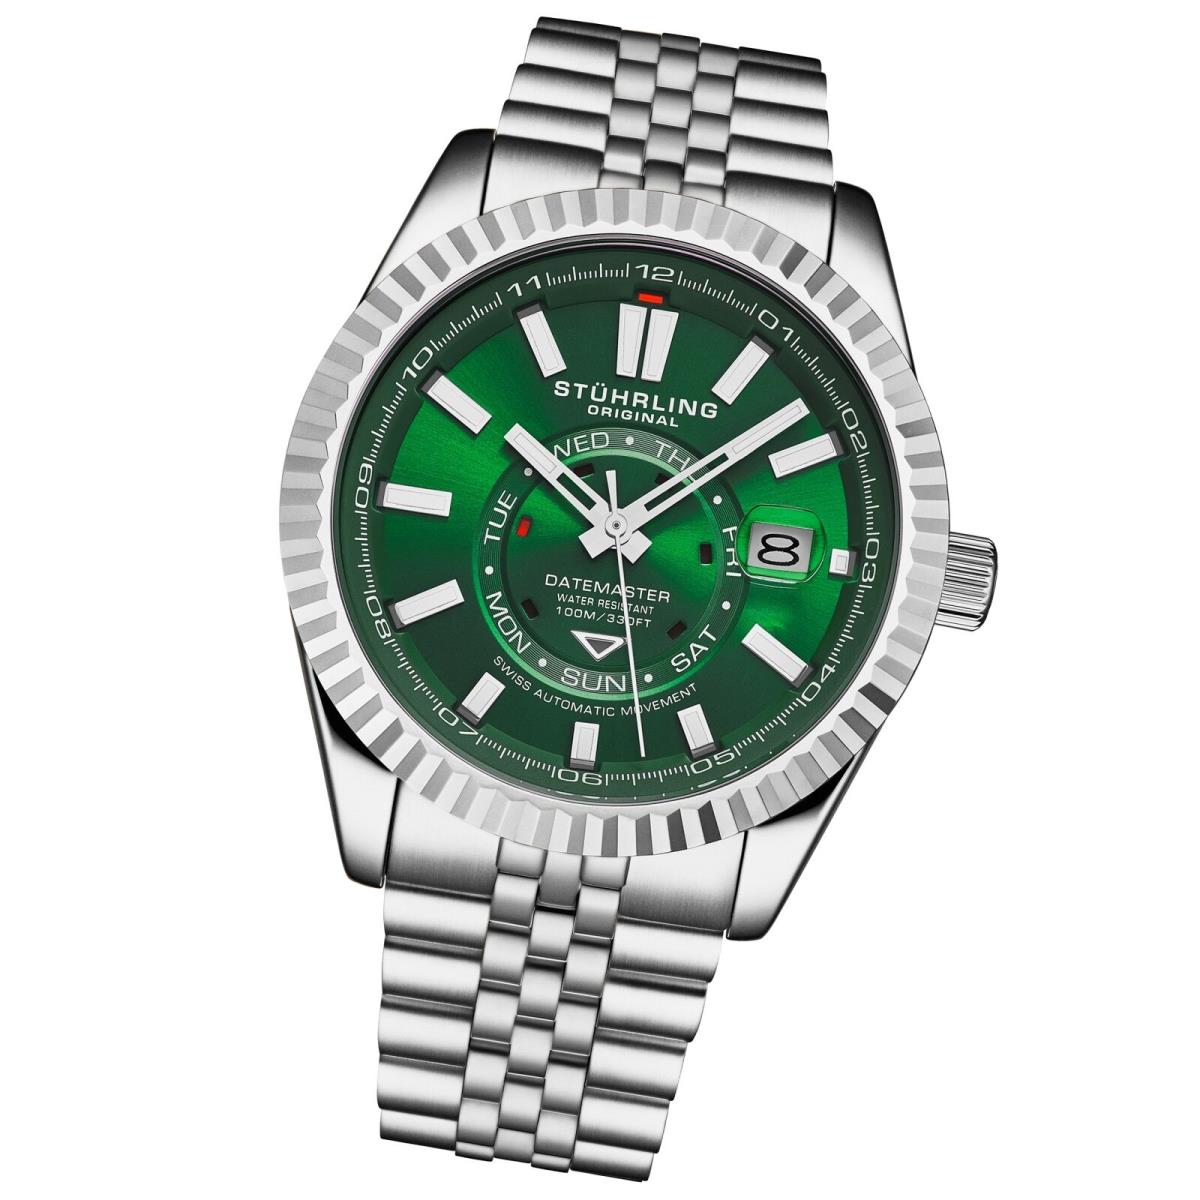 Stuhrling 1020 03 Datemaster Automatic Classic Green Stainless Steel Mens Watch